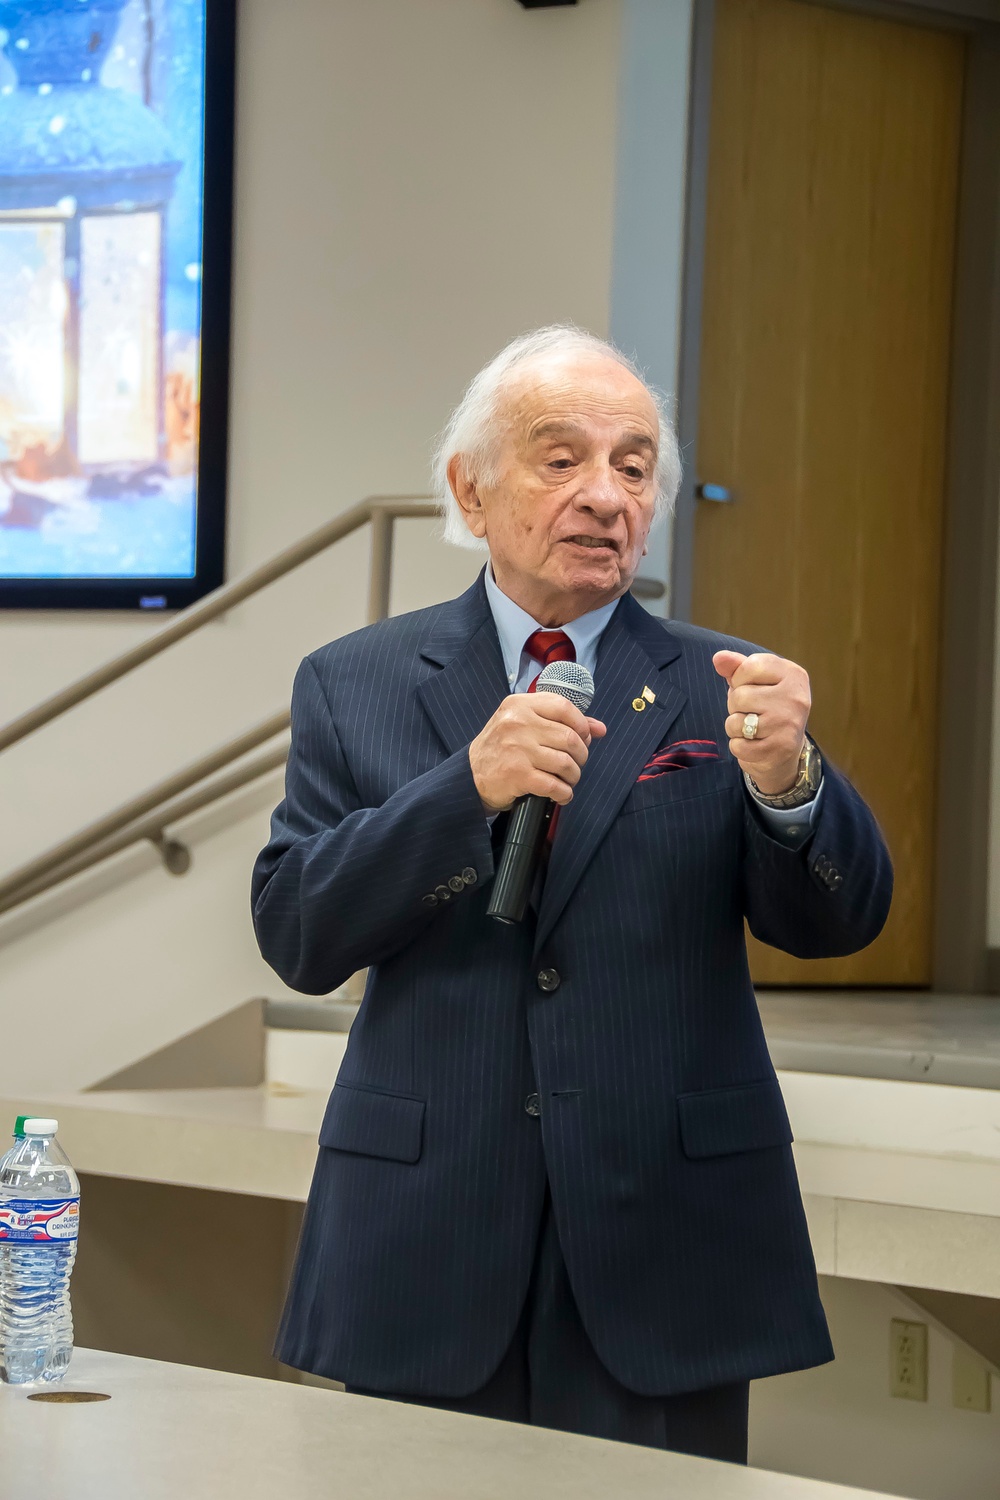 Holocaust Survivor Speaks of Life without Hate